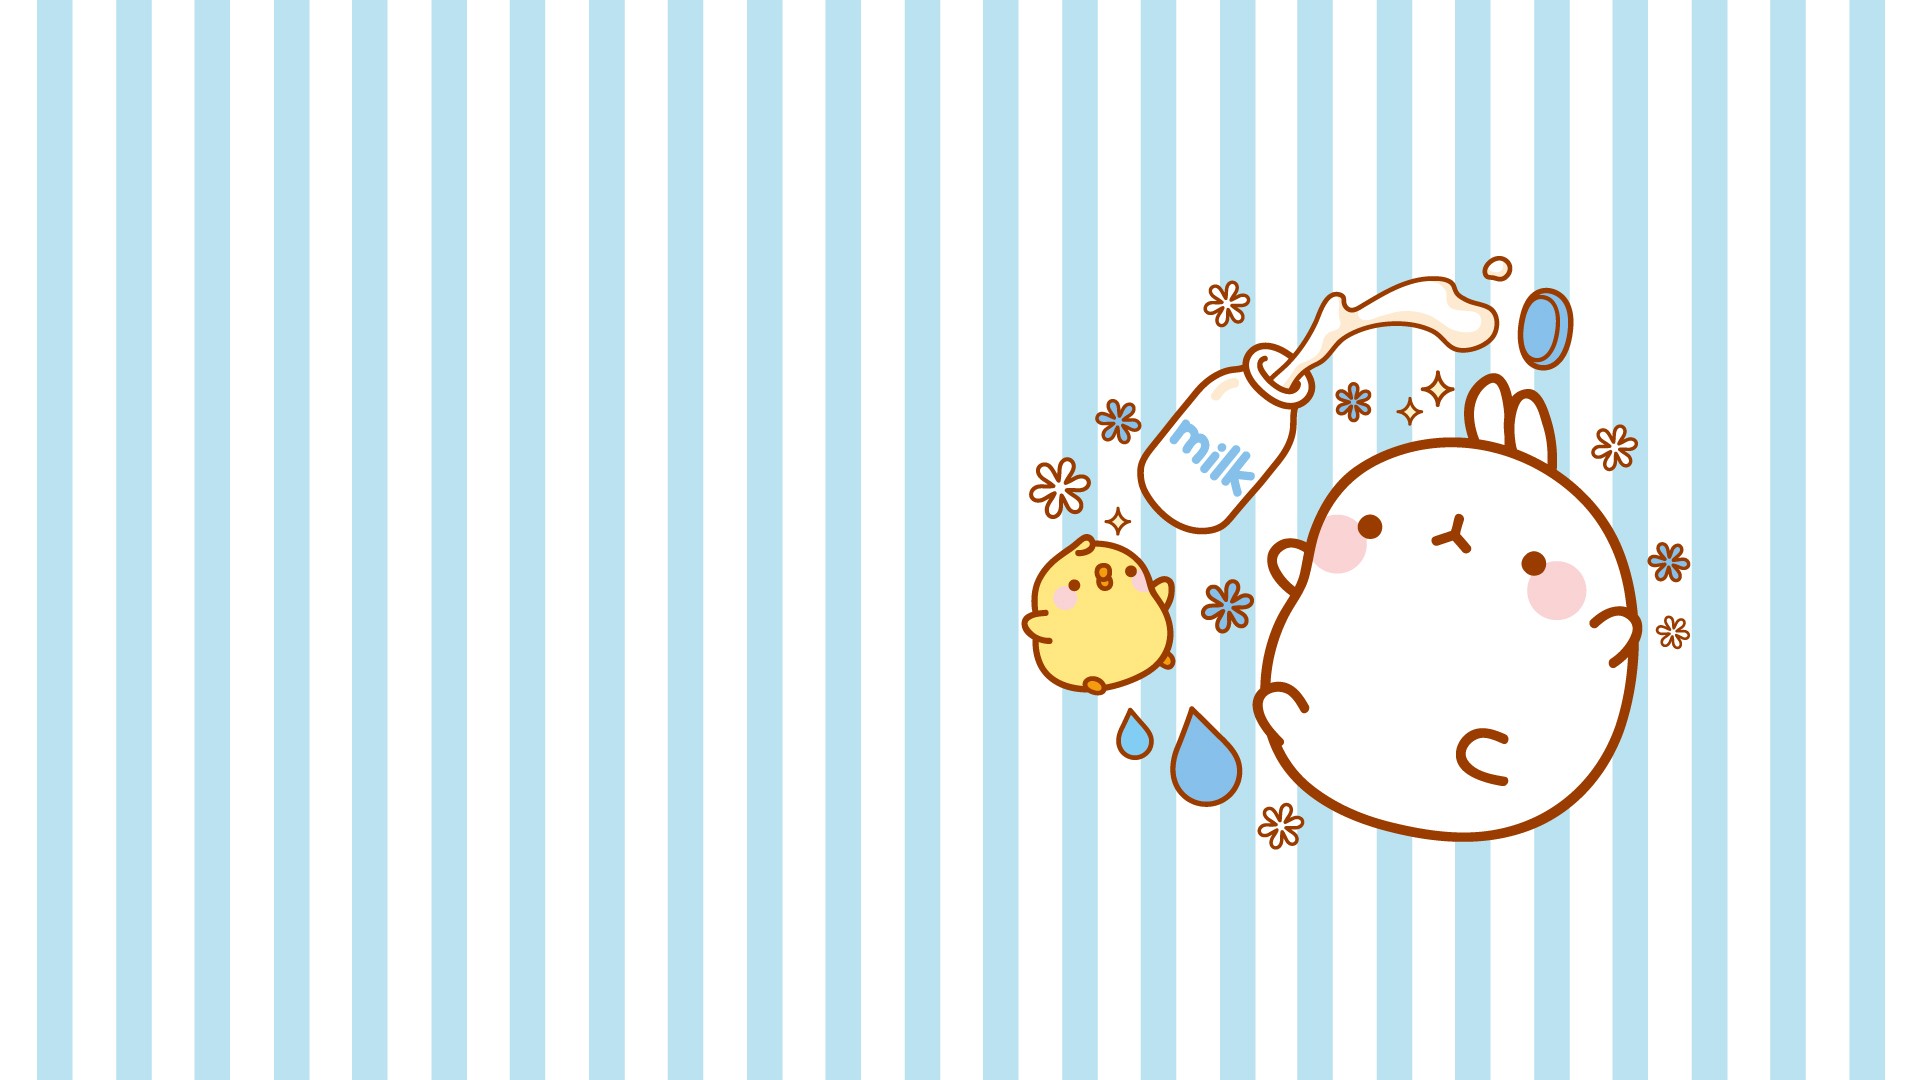  Kawaii background    Download free amazing backgrounds  for 